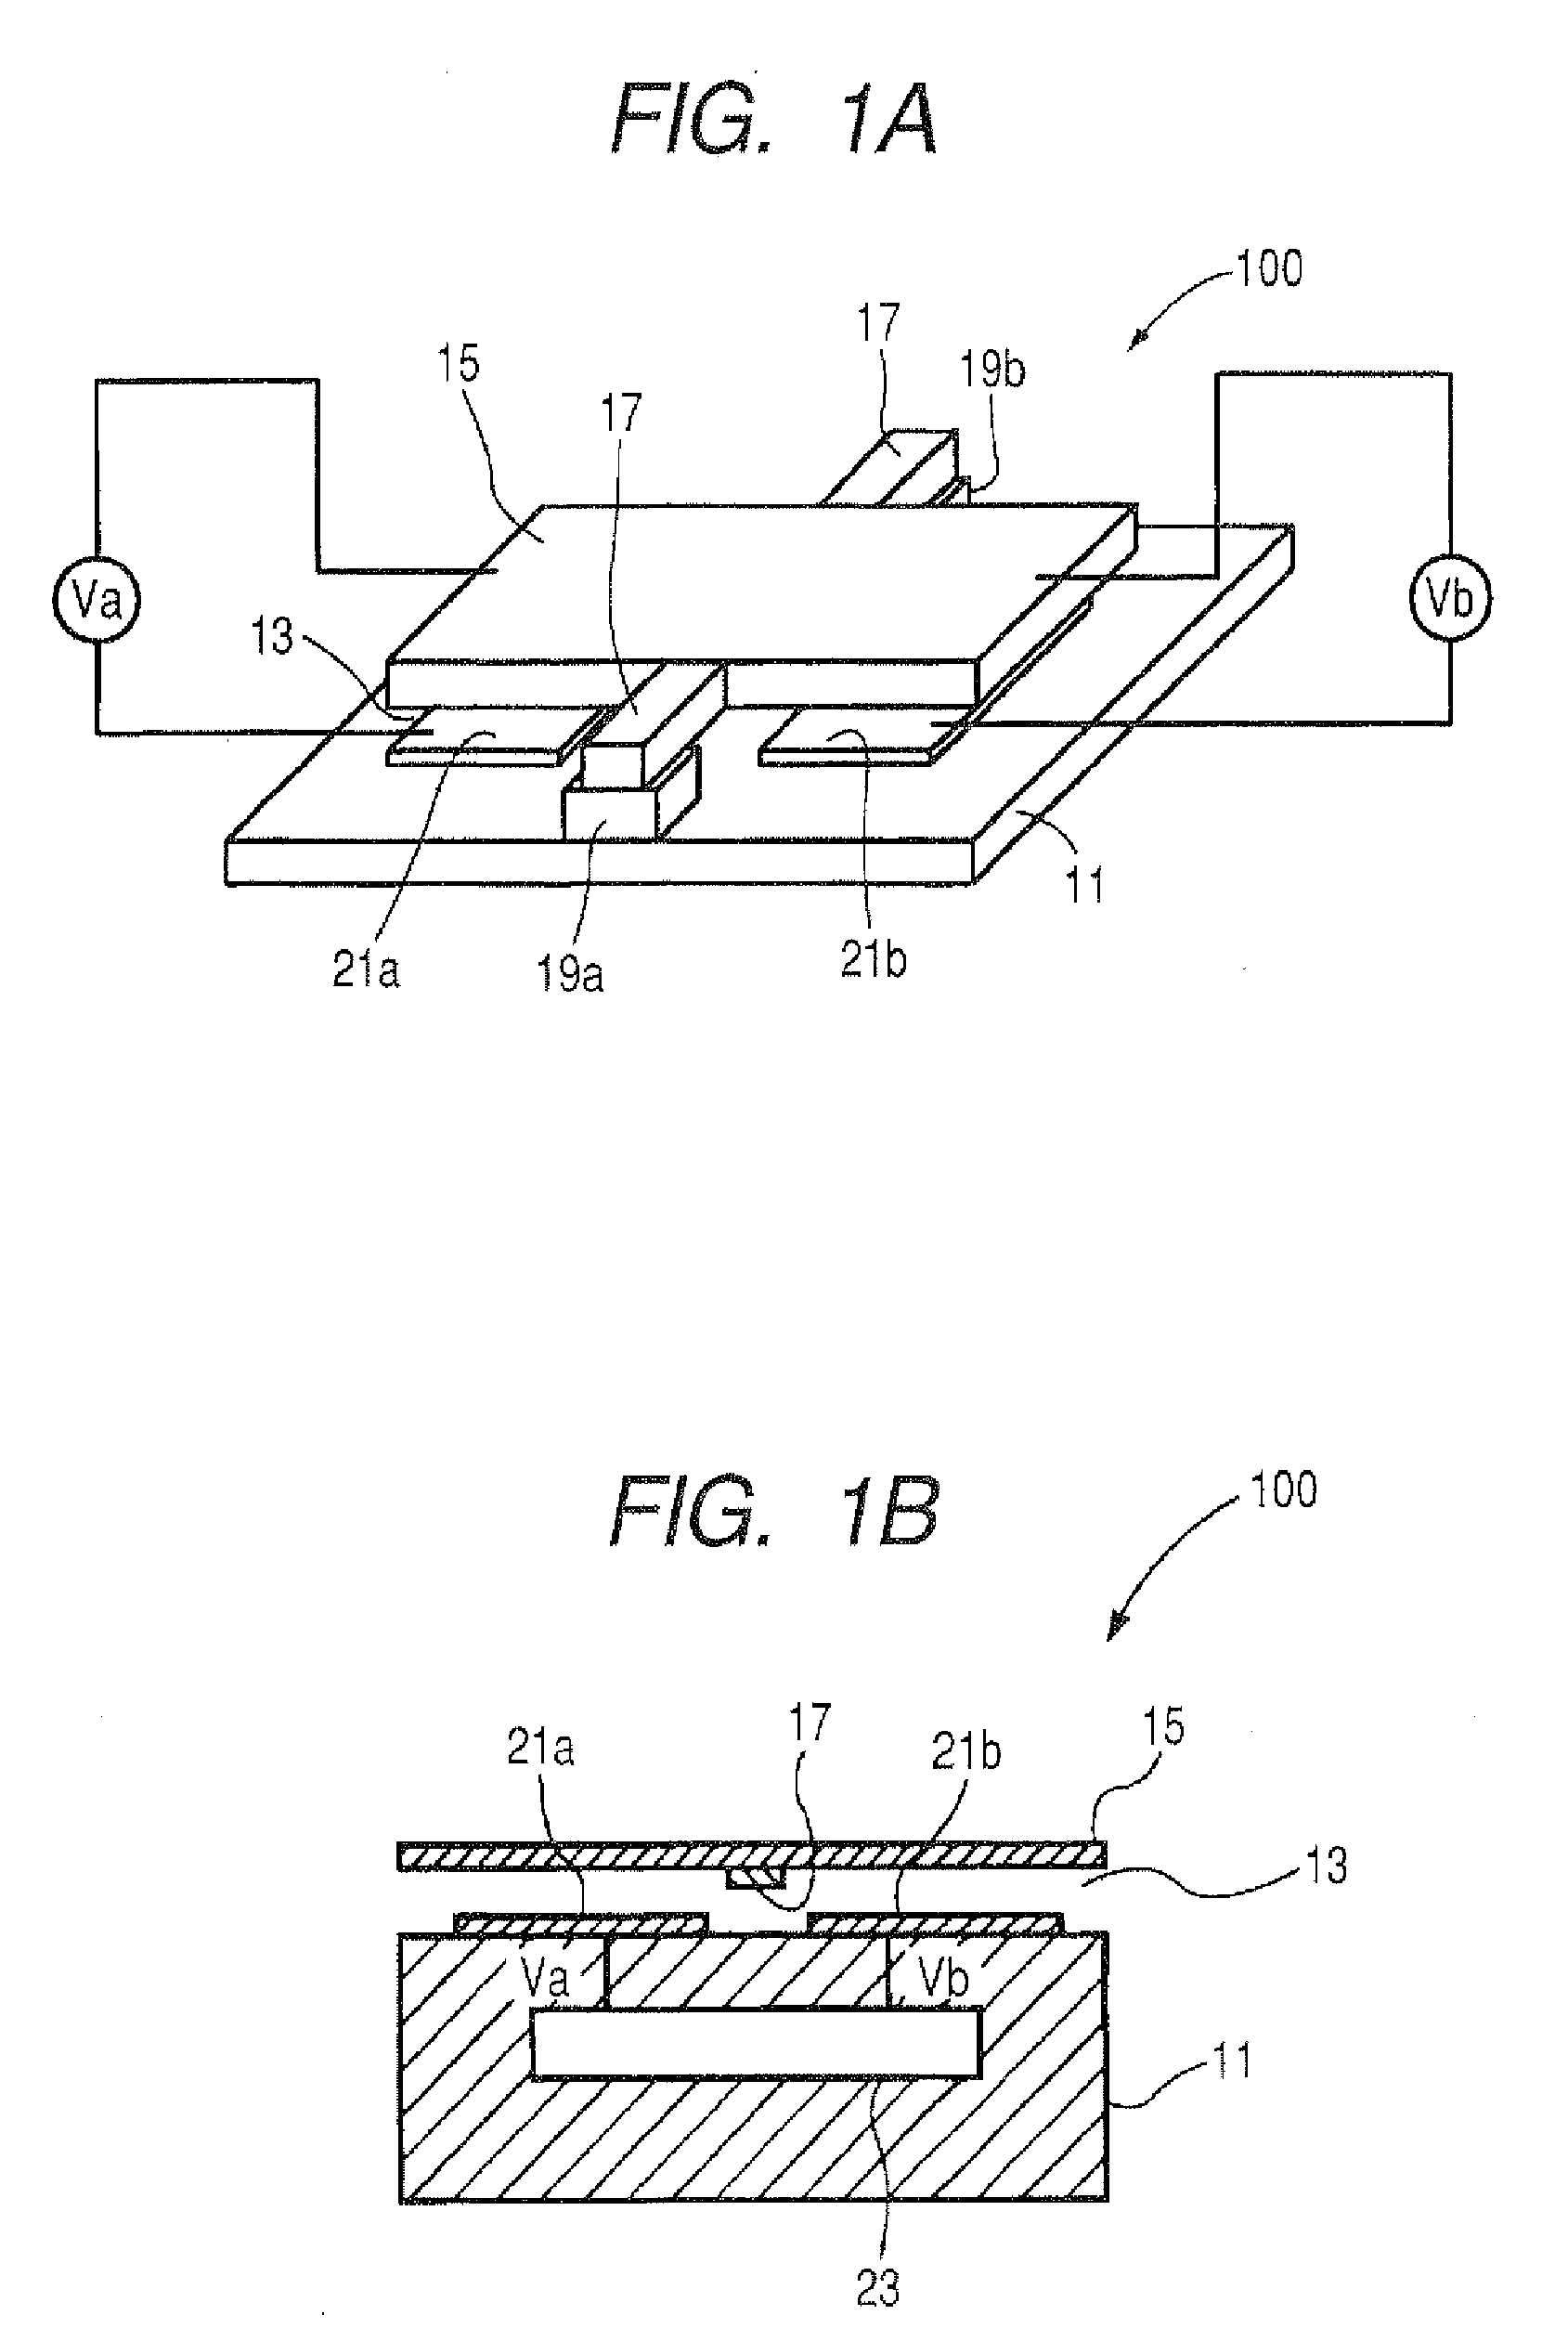 Micro-mechanical modulating element, micro-mechanical modulating element array, image forming apparatus, and method of designing a micro-mechanical modulating element